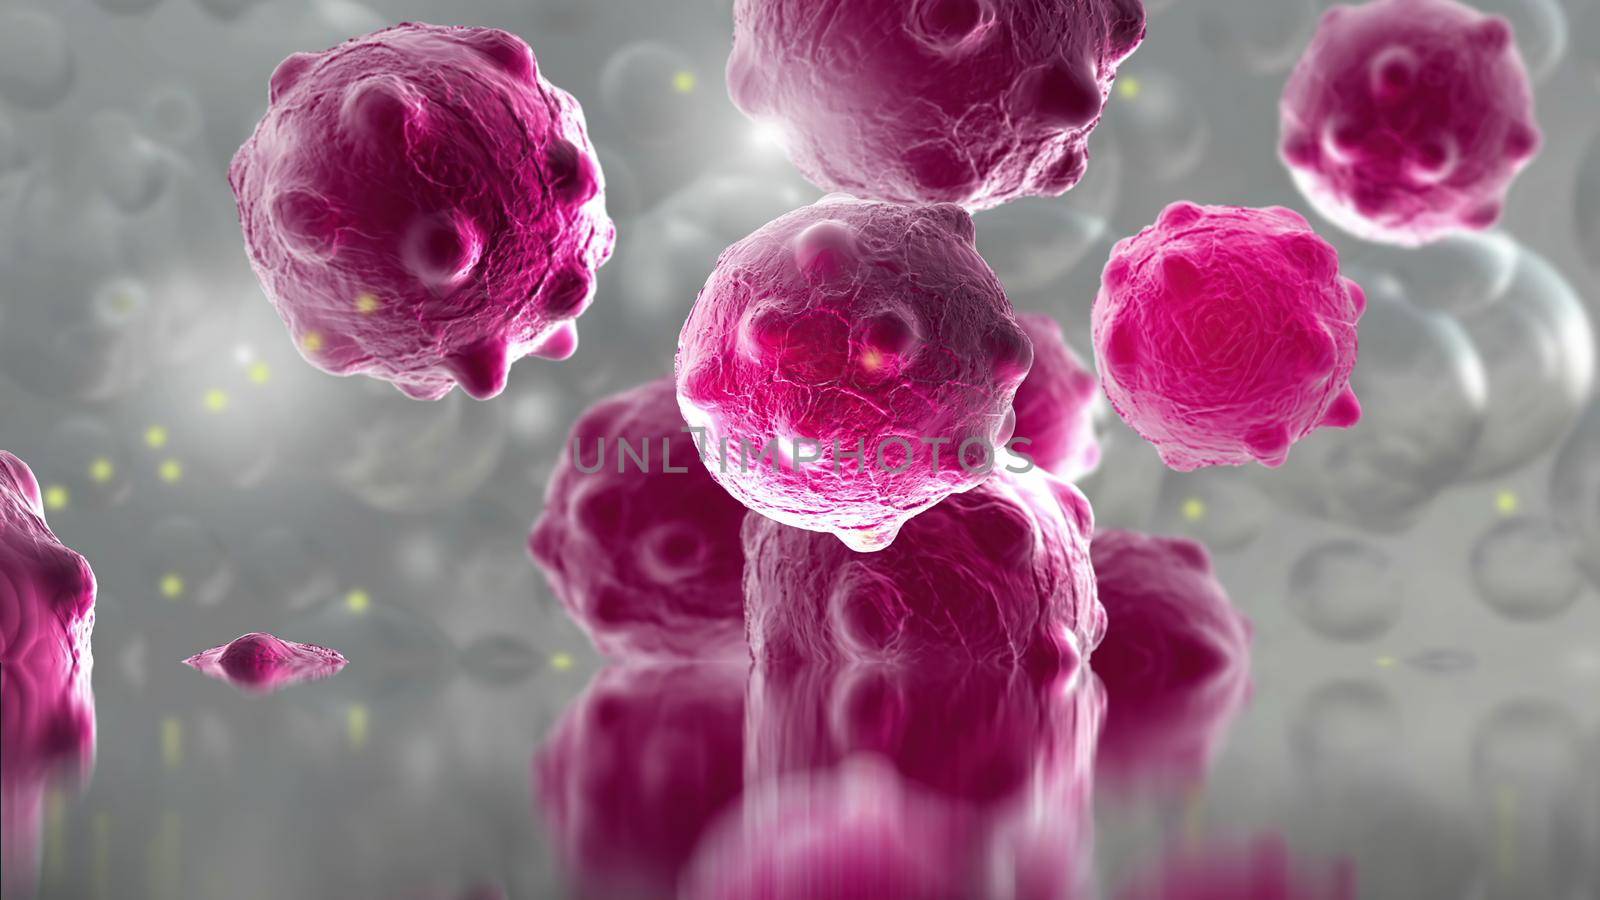 3d illustration - Damaged And Disintegrating Cancer Cell in frozen condition by vitanovski